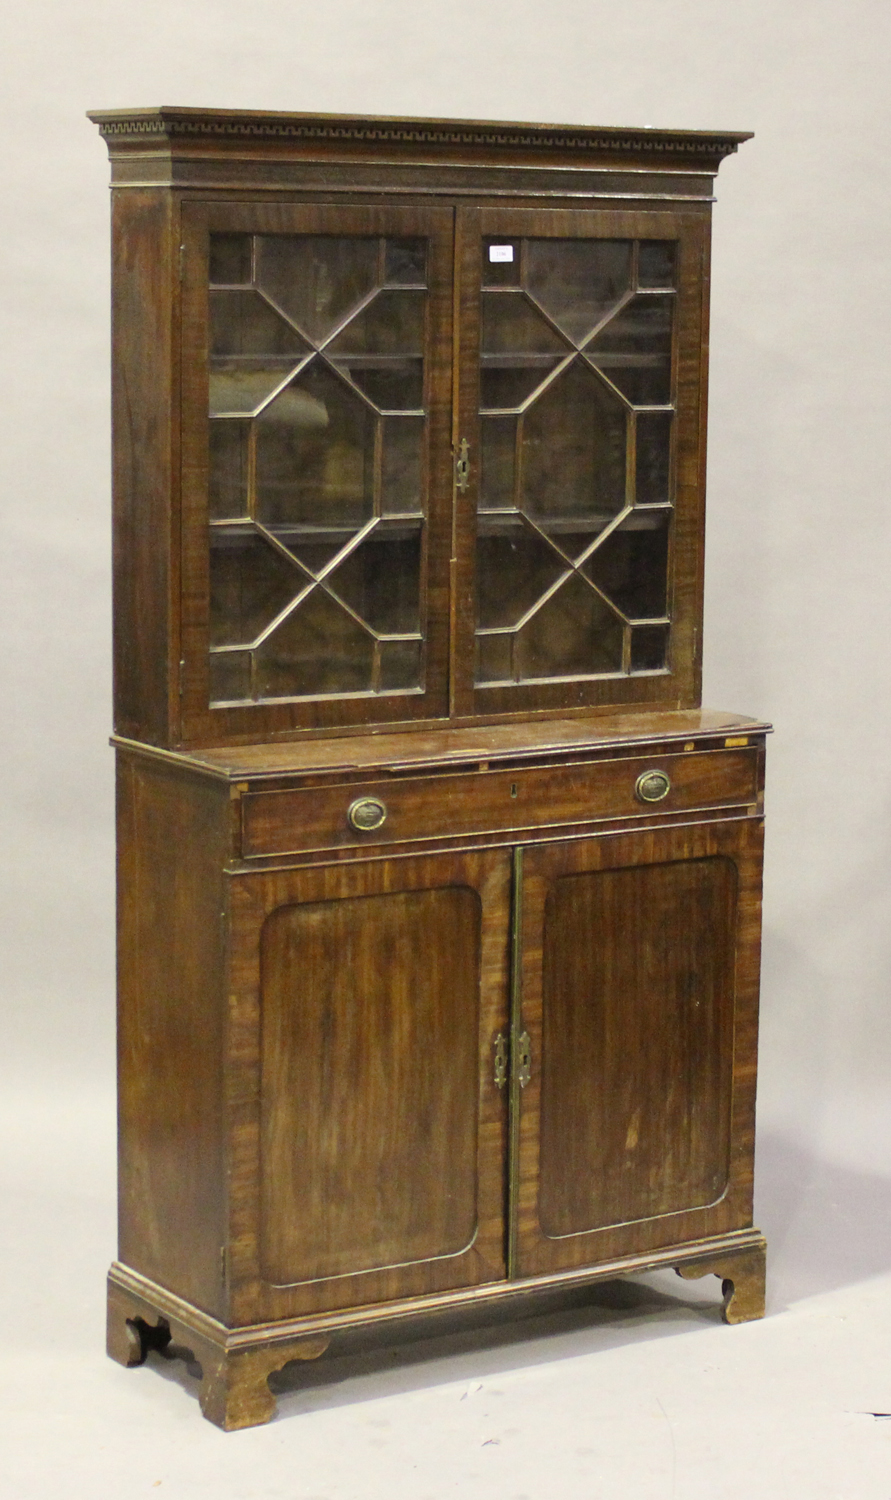 A 20th century George III style mahogany bookcase cabinet, fitted with a pair of astragal glazed